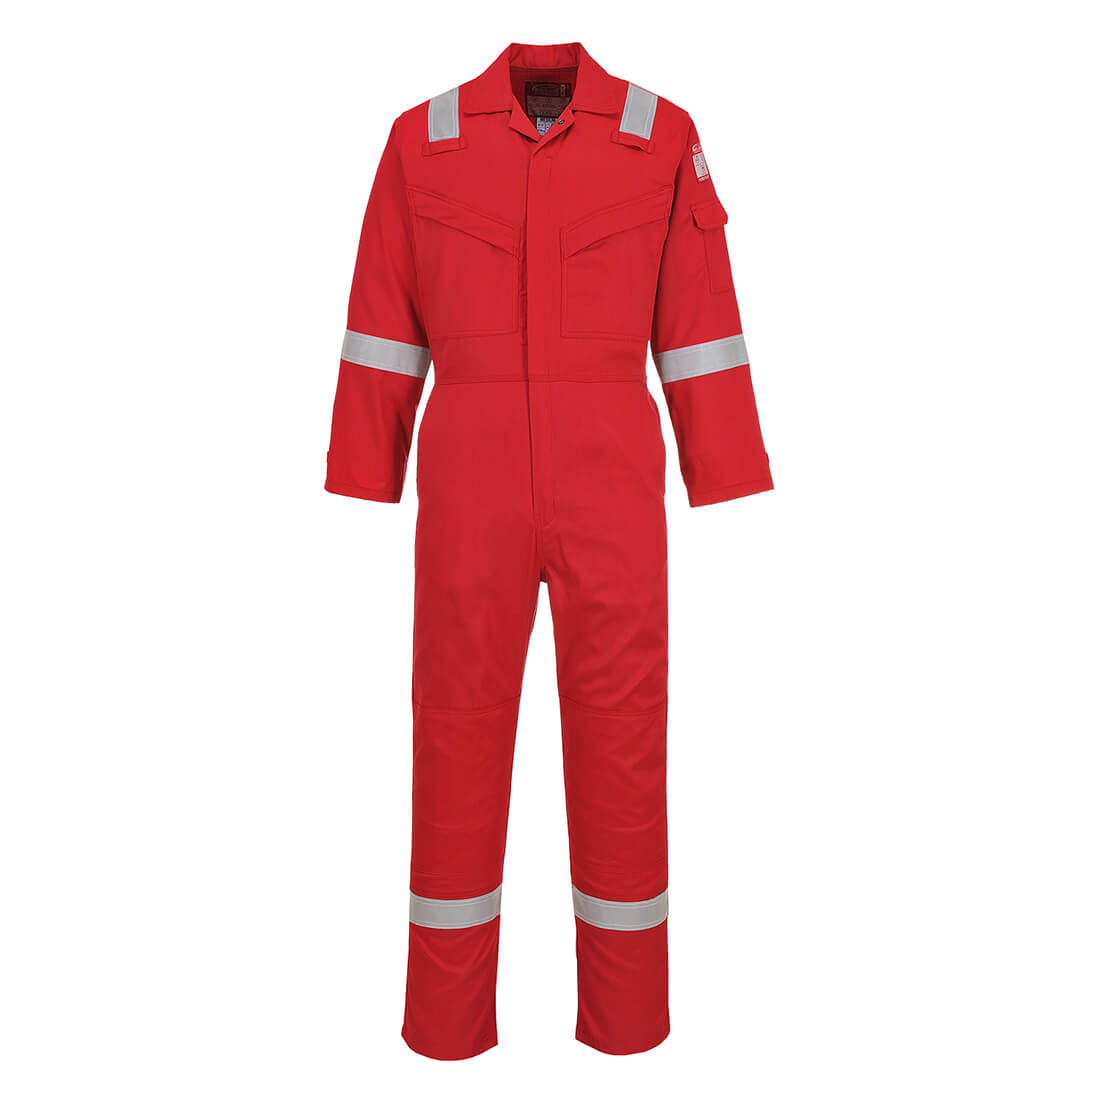 Image of Biz Flame Mens Flame Resistant Super Lightweight Antistatic Coverall Red 3XL 32"